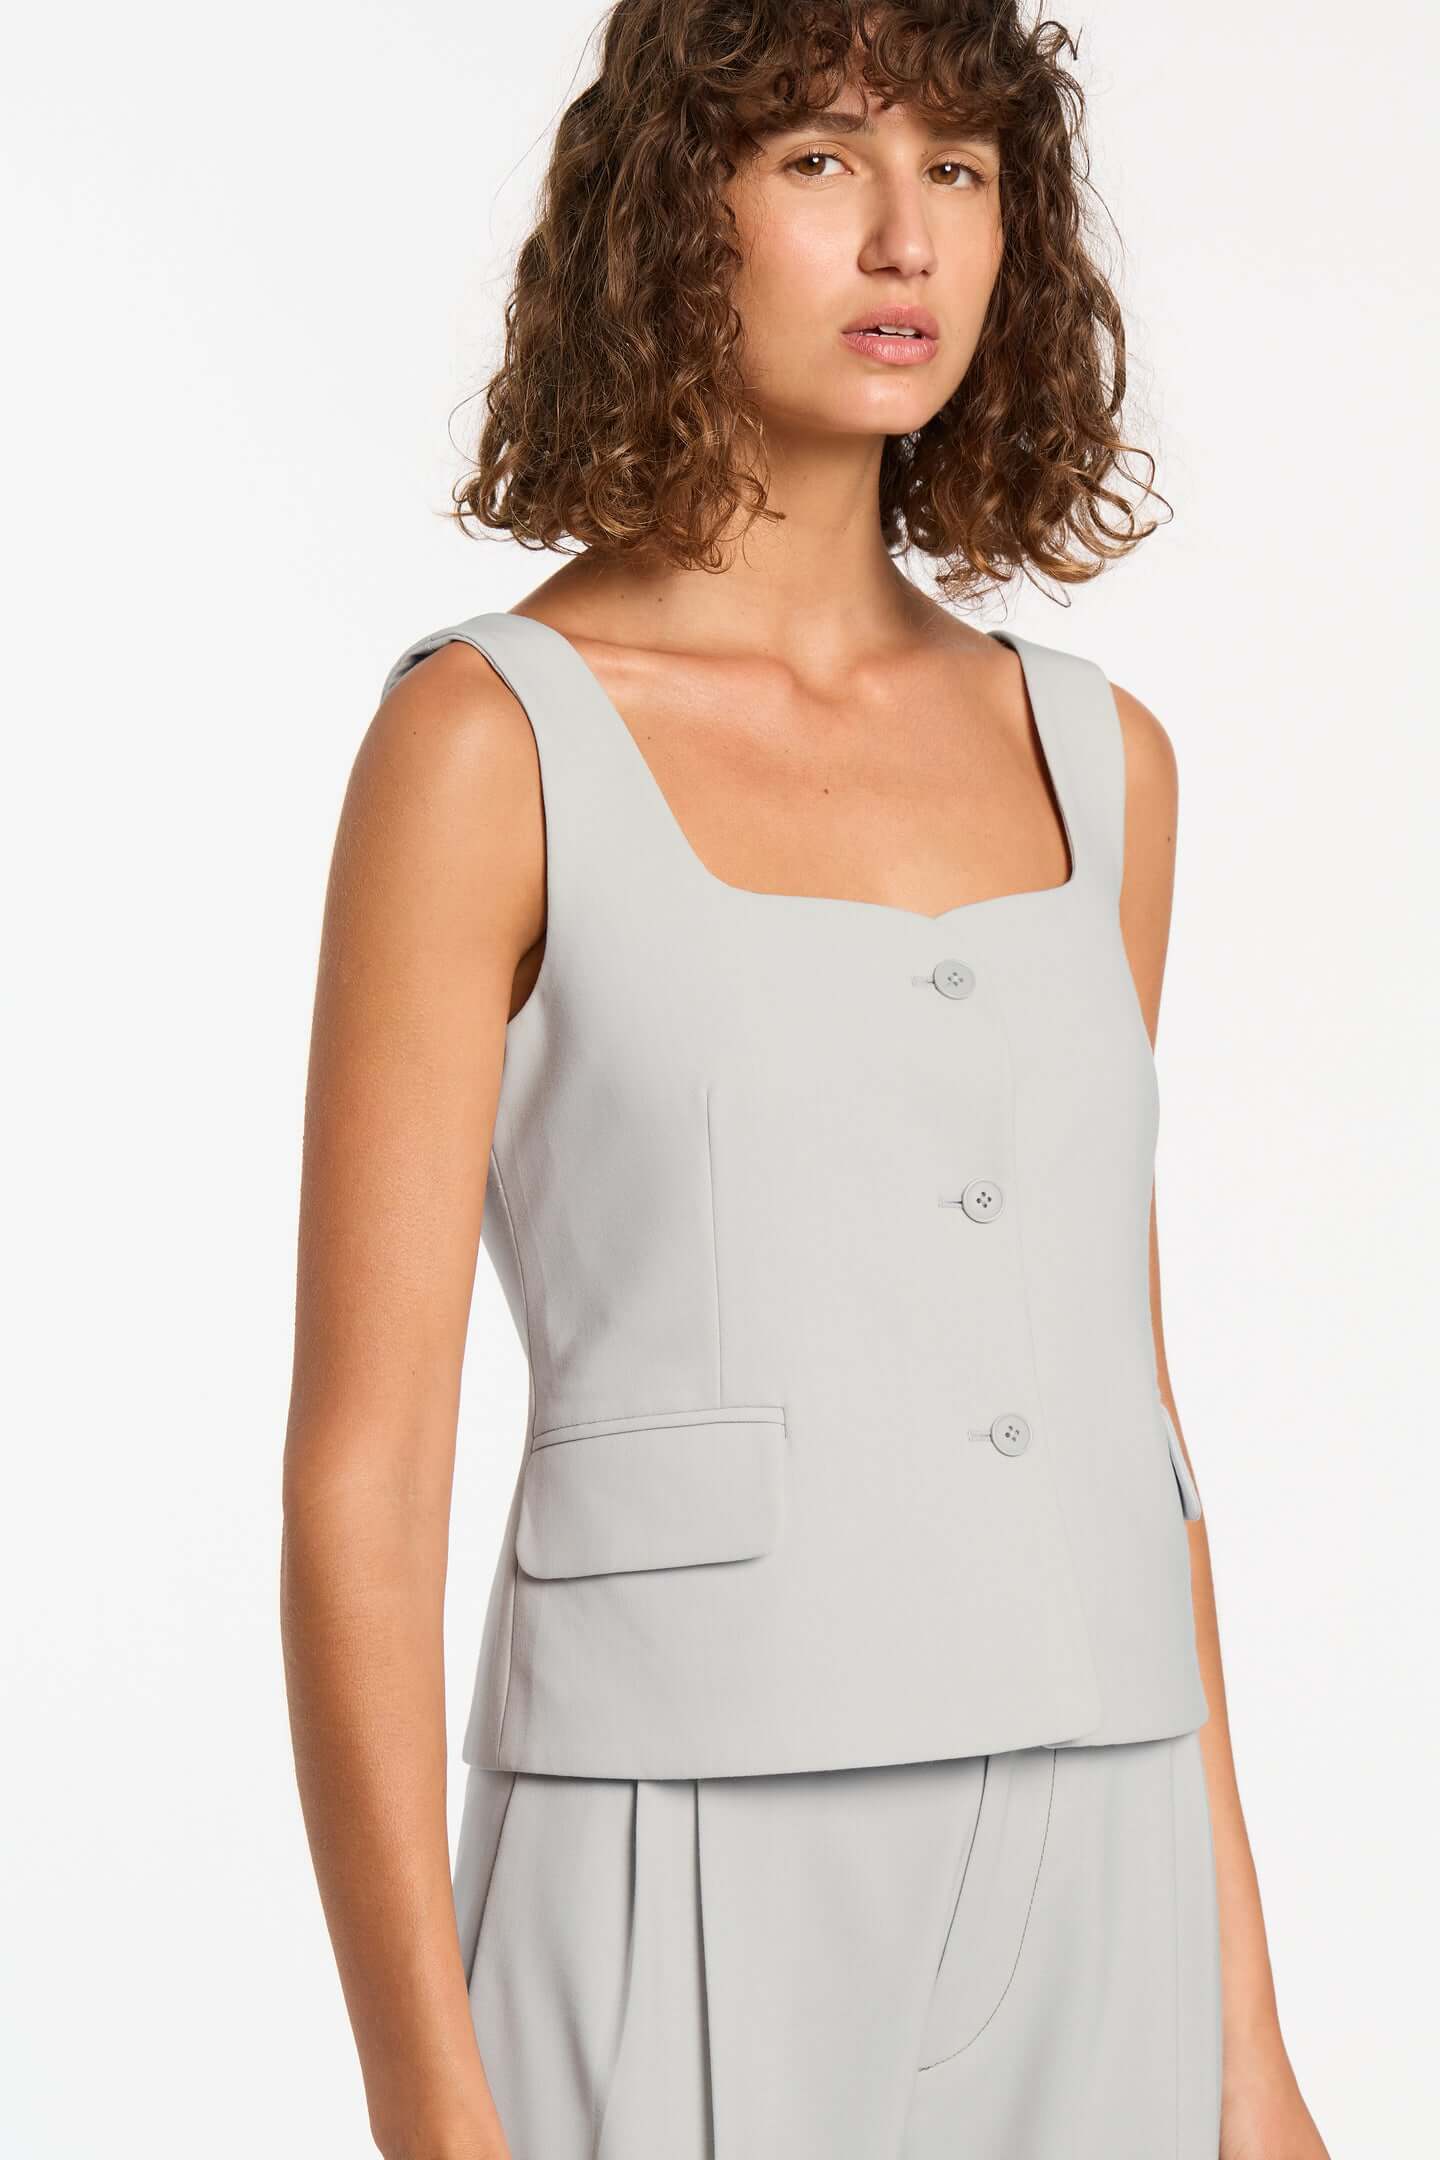 SIR Leni Button Down Bodice in Ice Blue available at TNT The New Trend Australia. Free shipping on orders over $300 AUD.